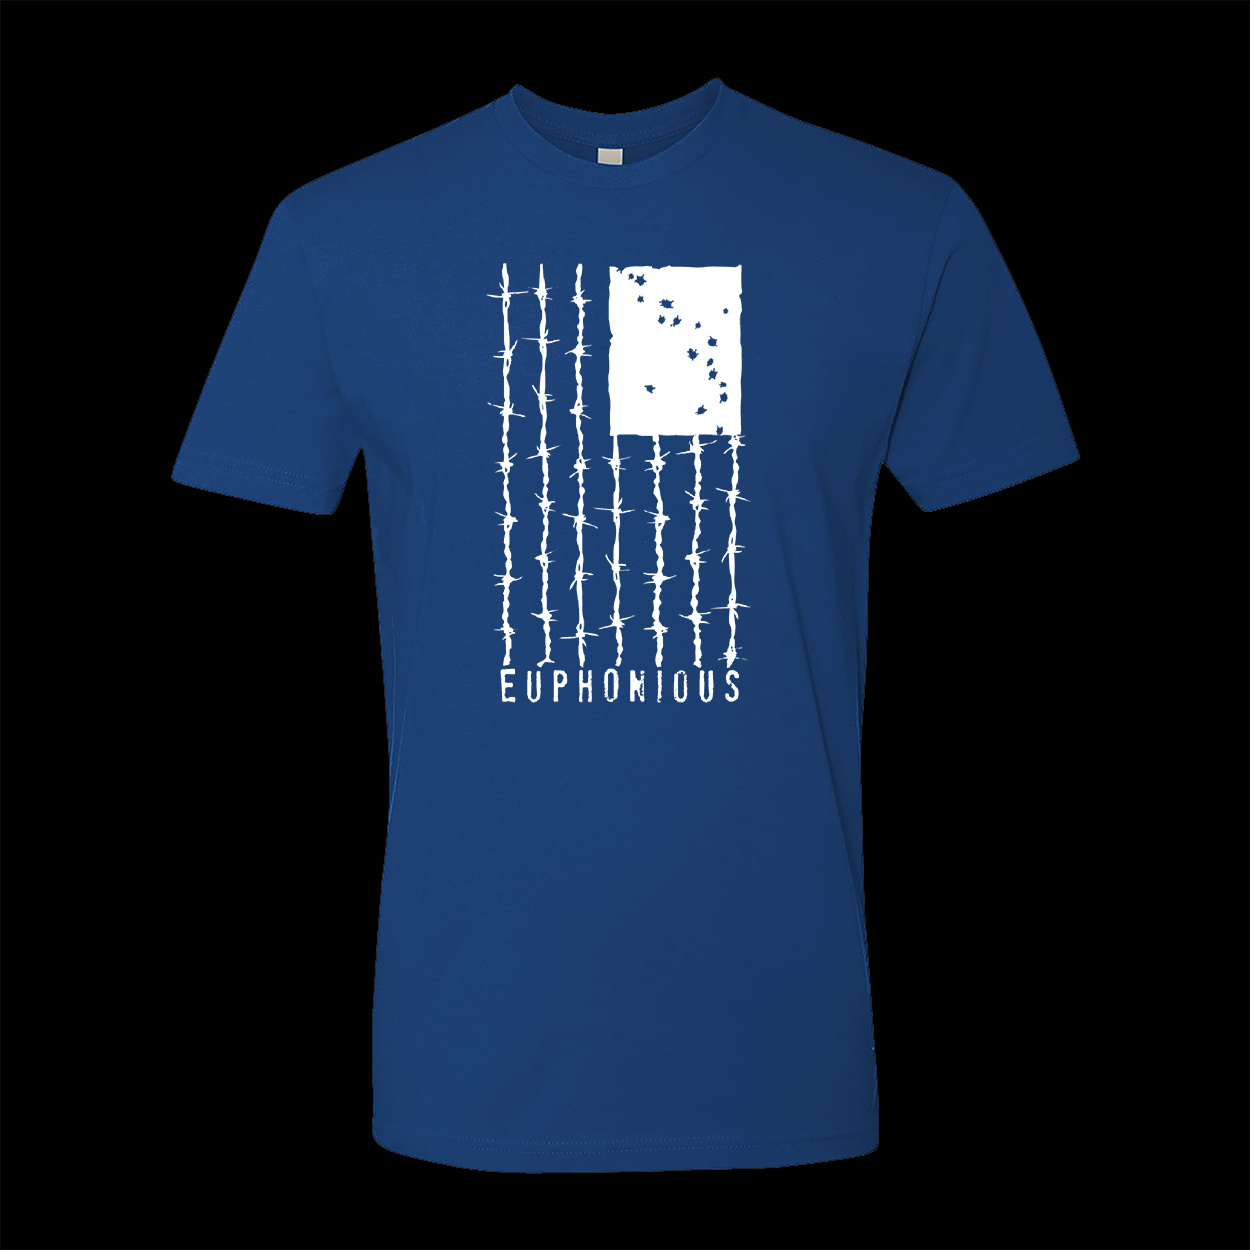 euphonius Barbed Wire american flag t-shirt color royal blue